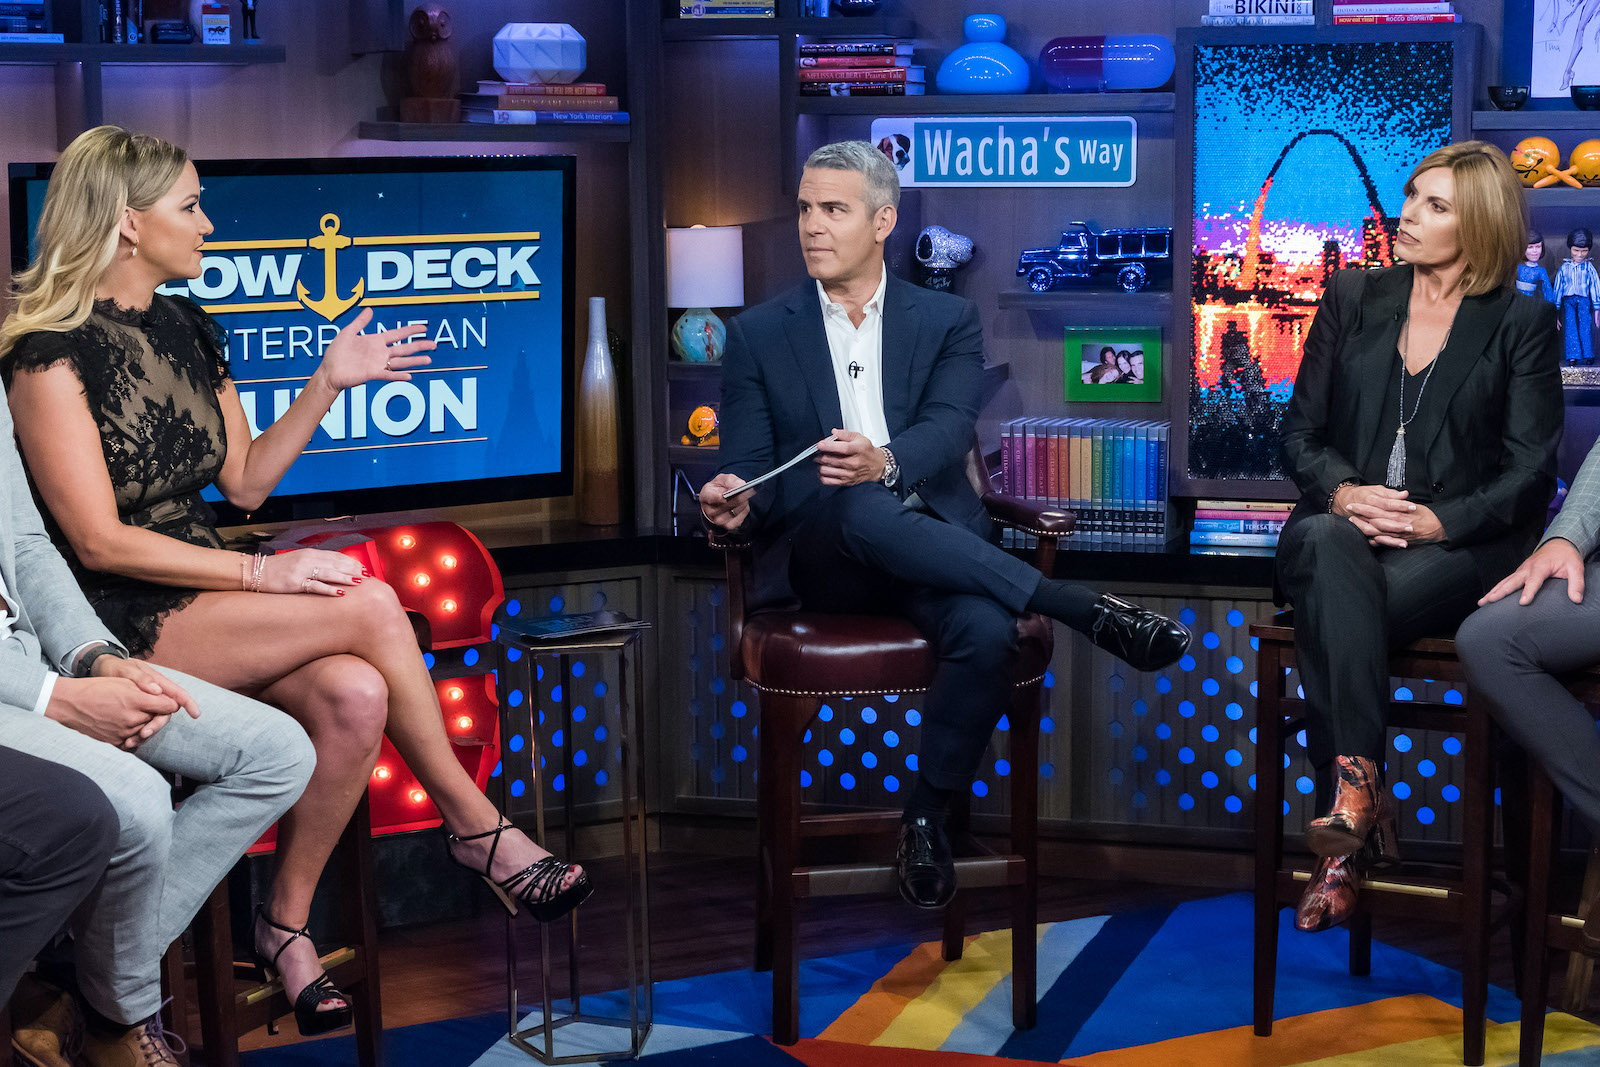 Hannah Ferrier discusses and issue with Captain Sandy Yawn during the Below Deck Med reunion in the WWHL Clubhouse